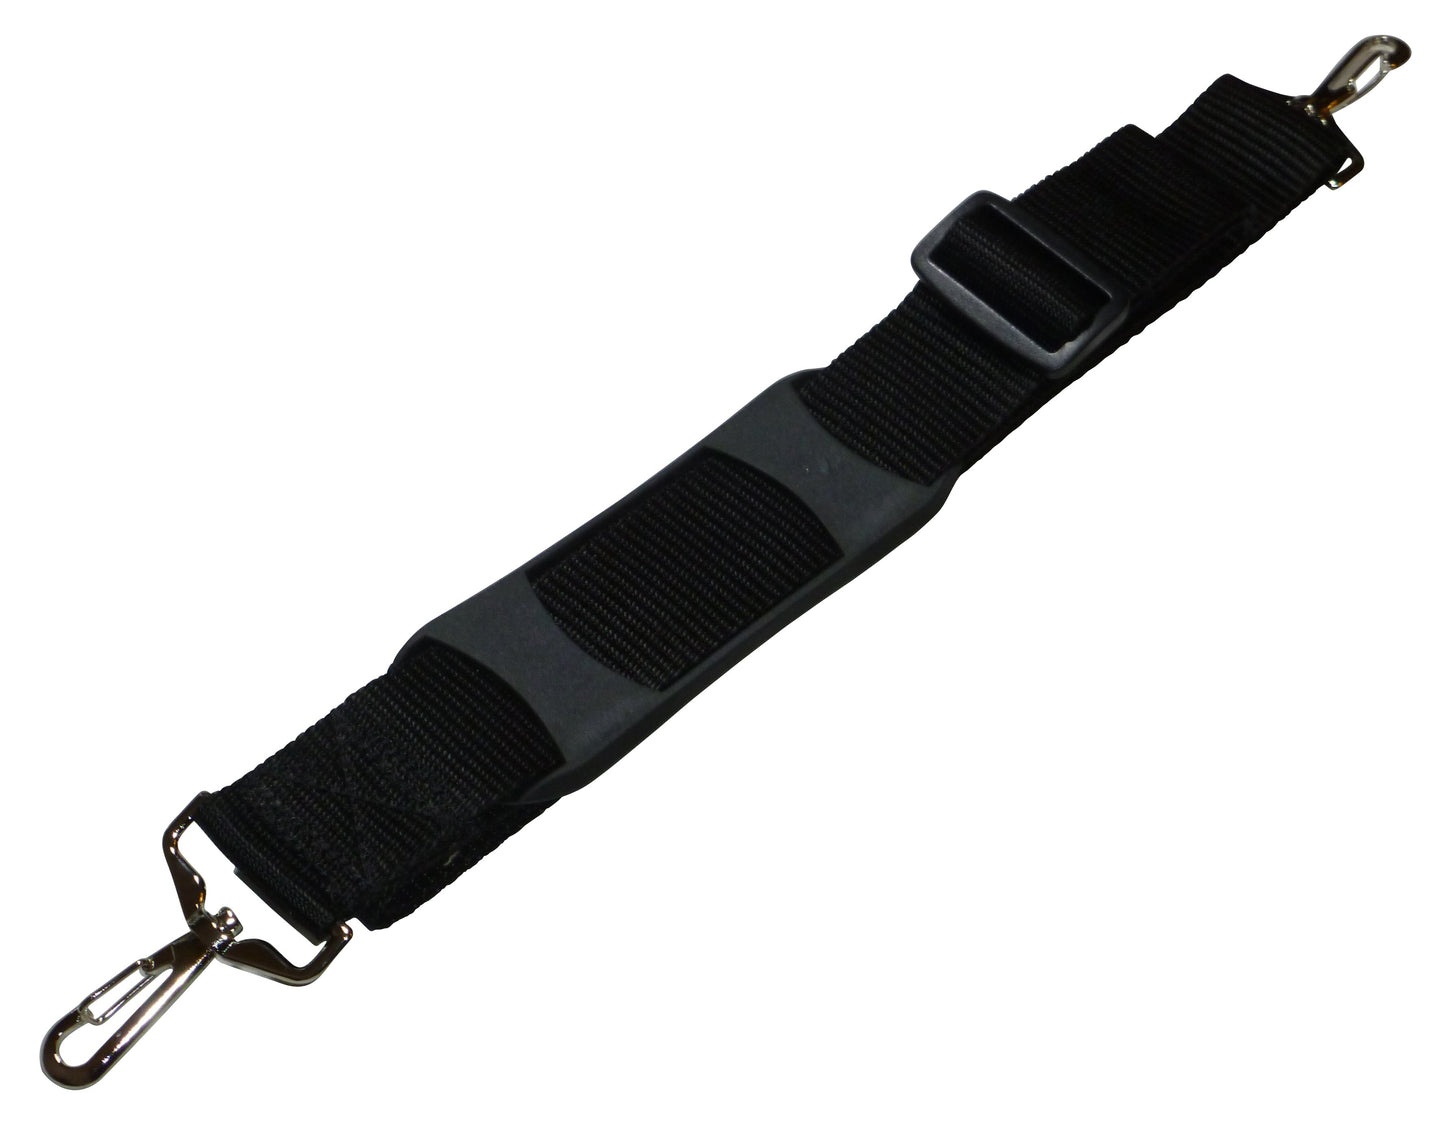 38mm Bag Strap with Metal Buckles and Shoulder Pad, 150cm in black